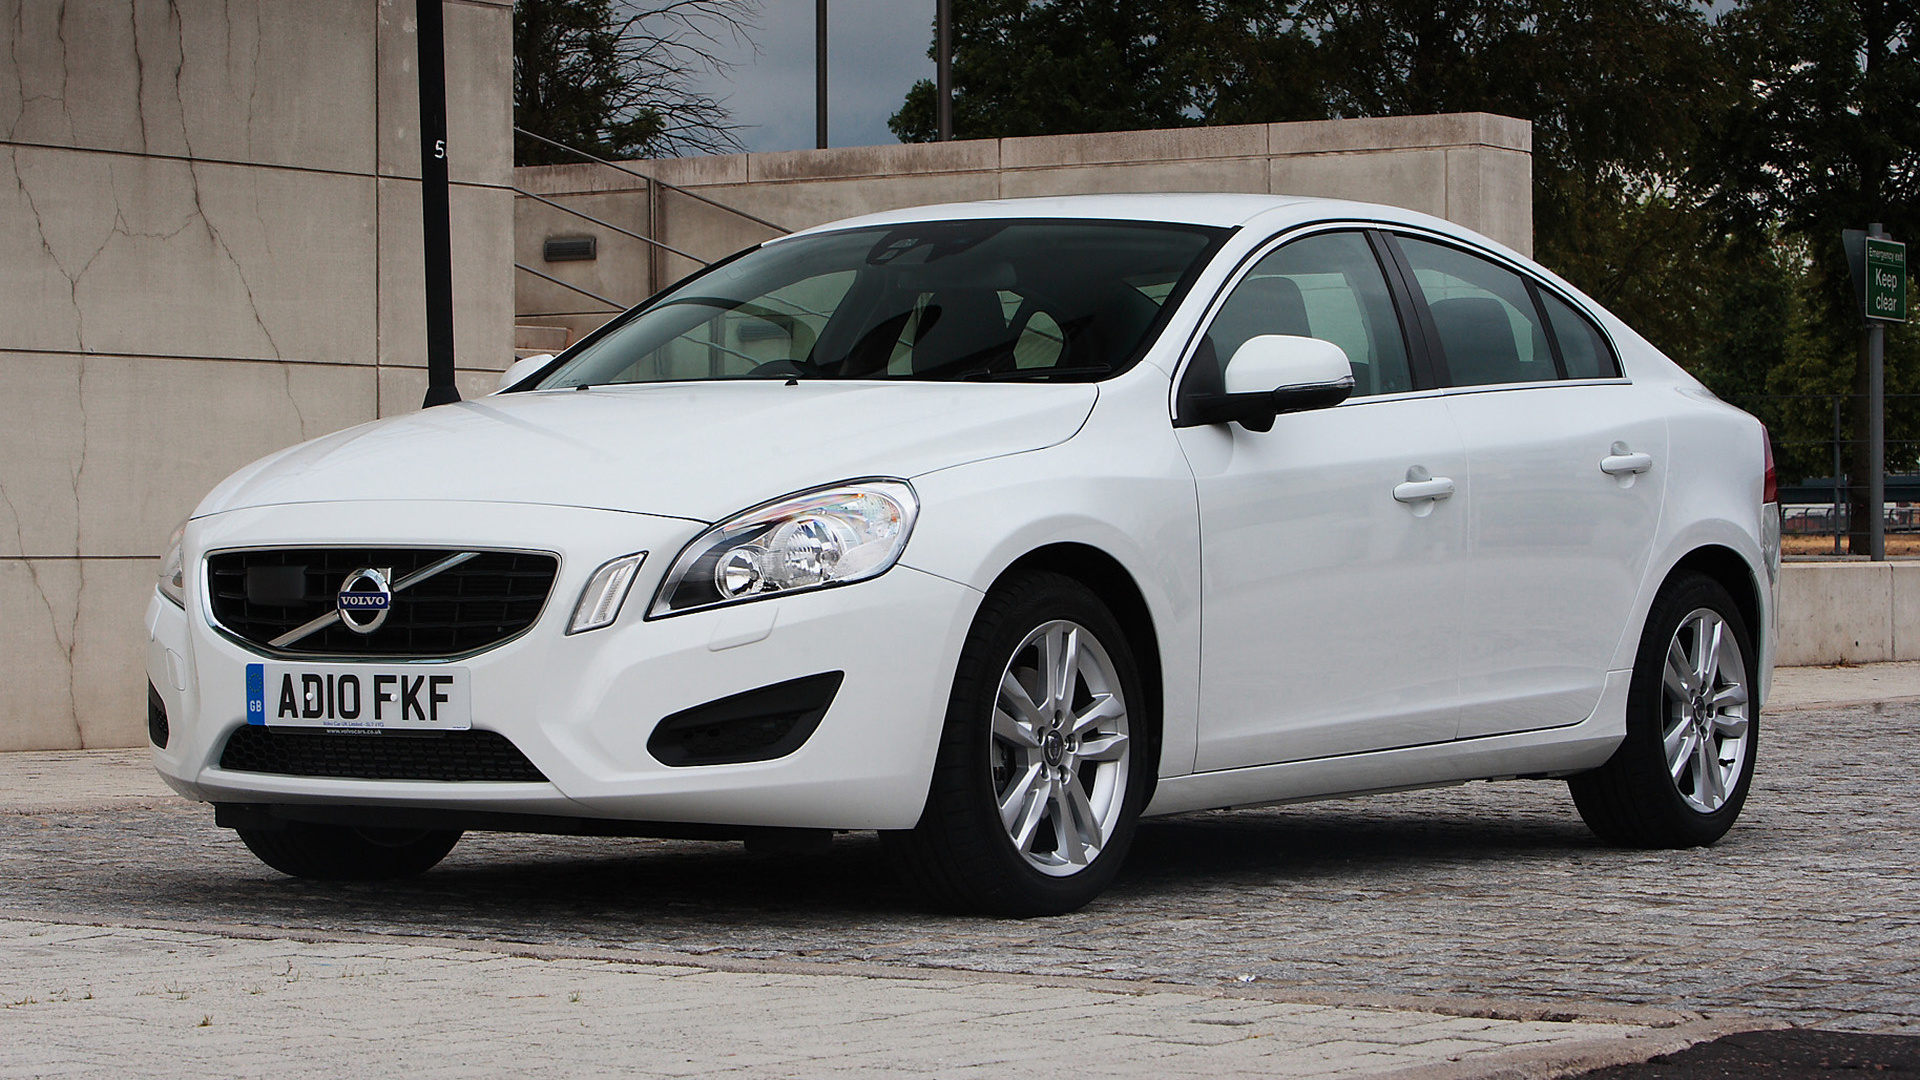 2010 Volvo S60 (UK) - Wallpapers and HD Images | Car Pixel